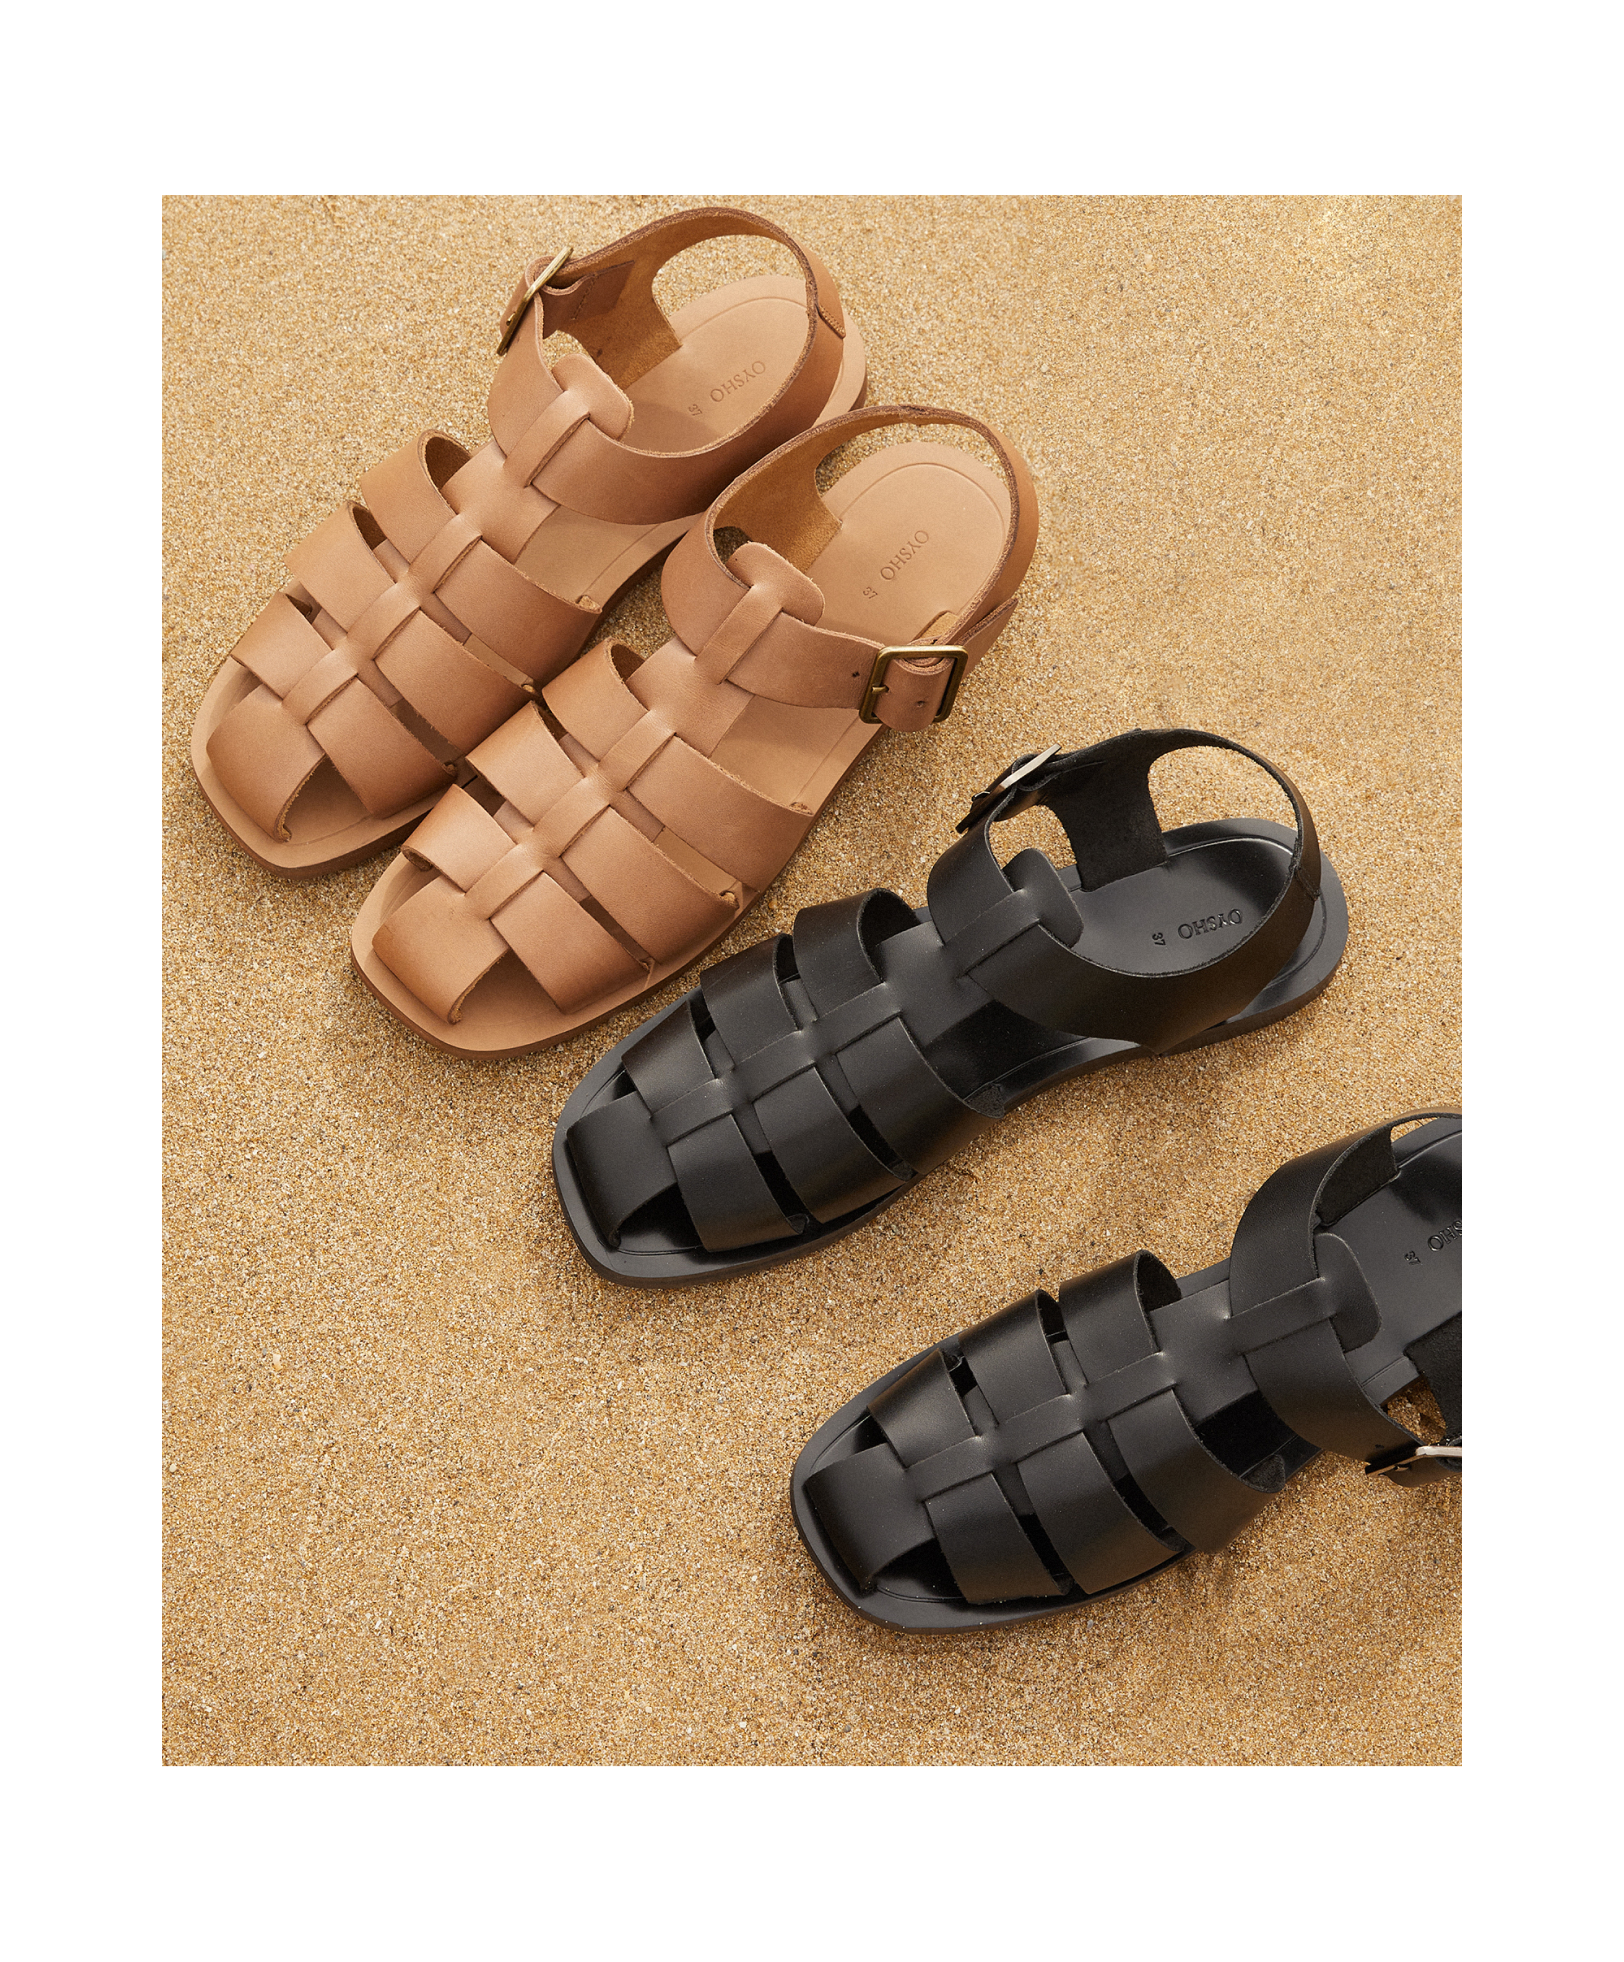 Leather cage sandals